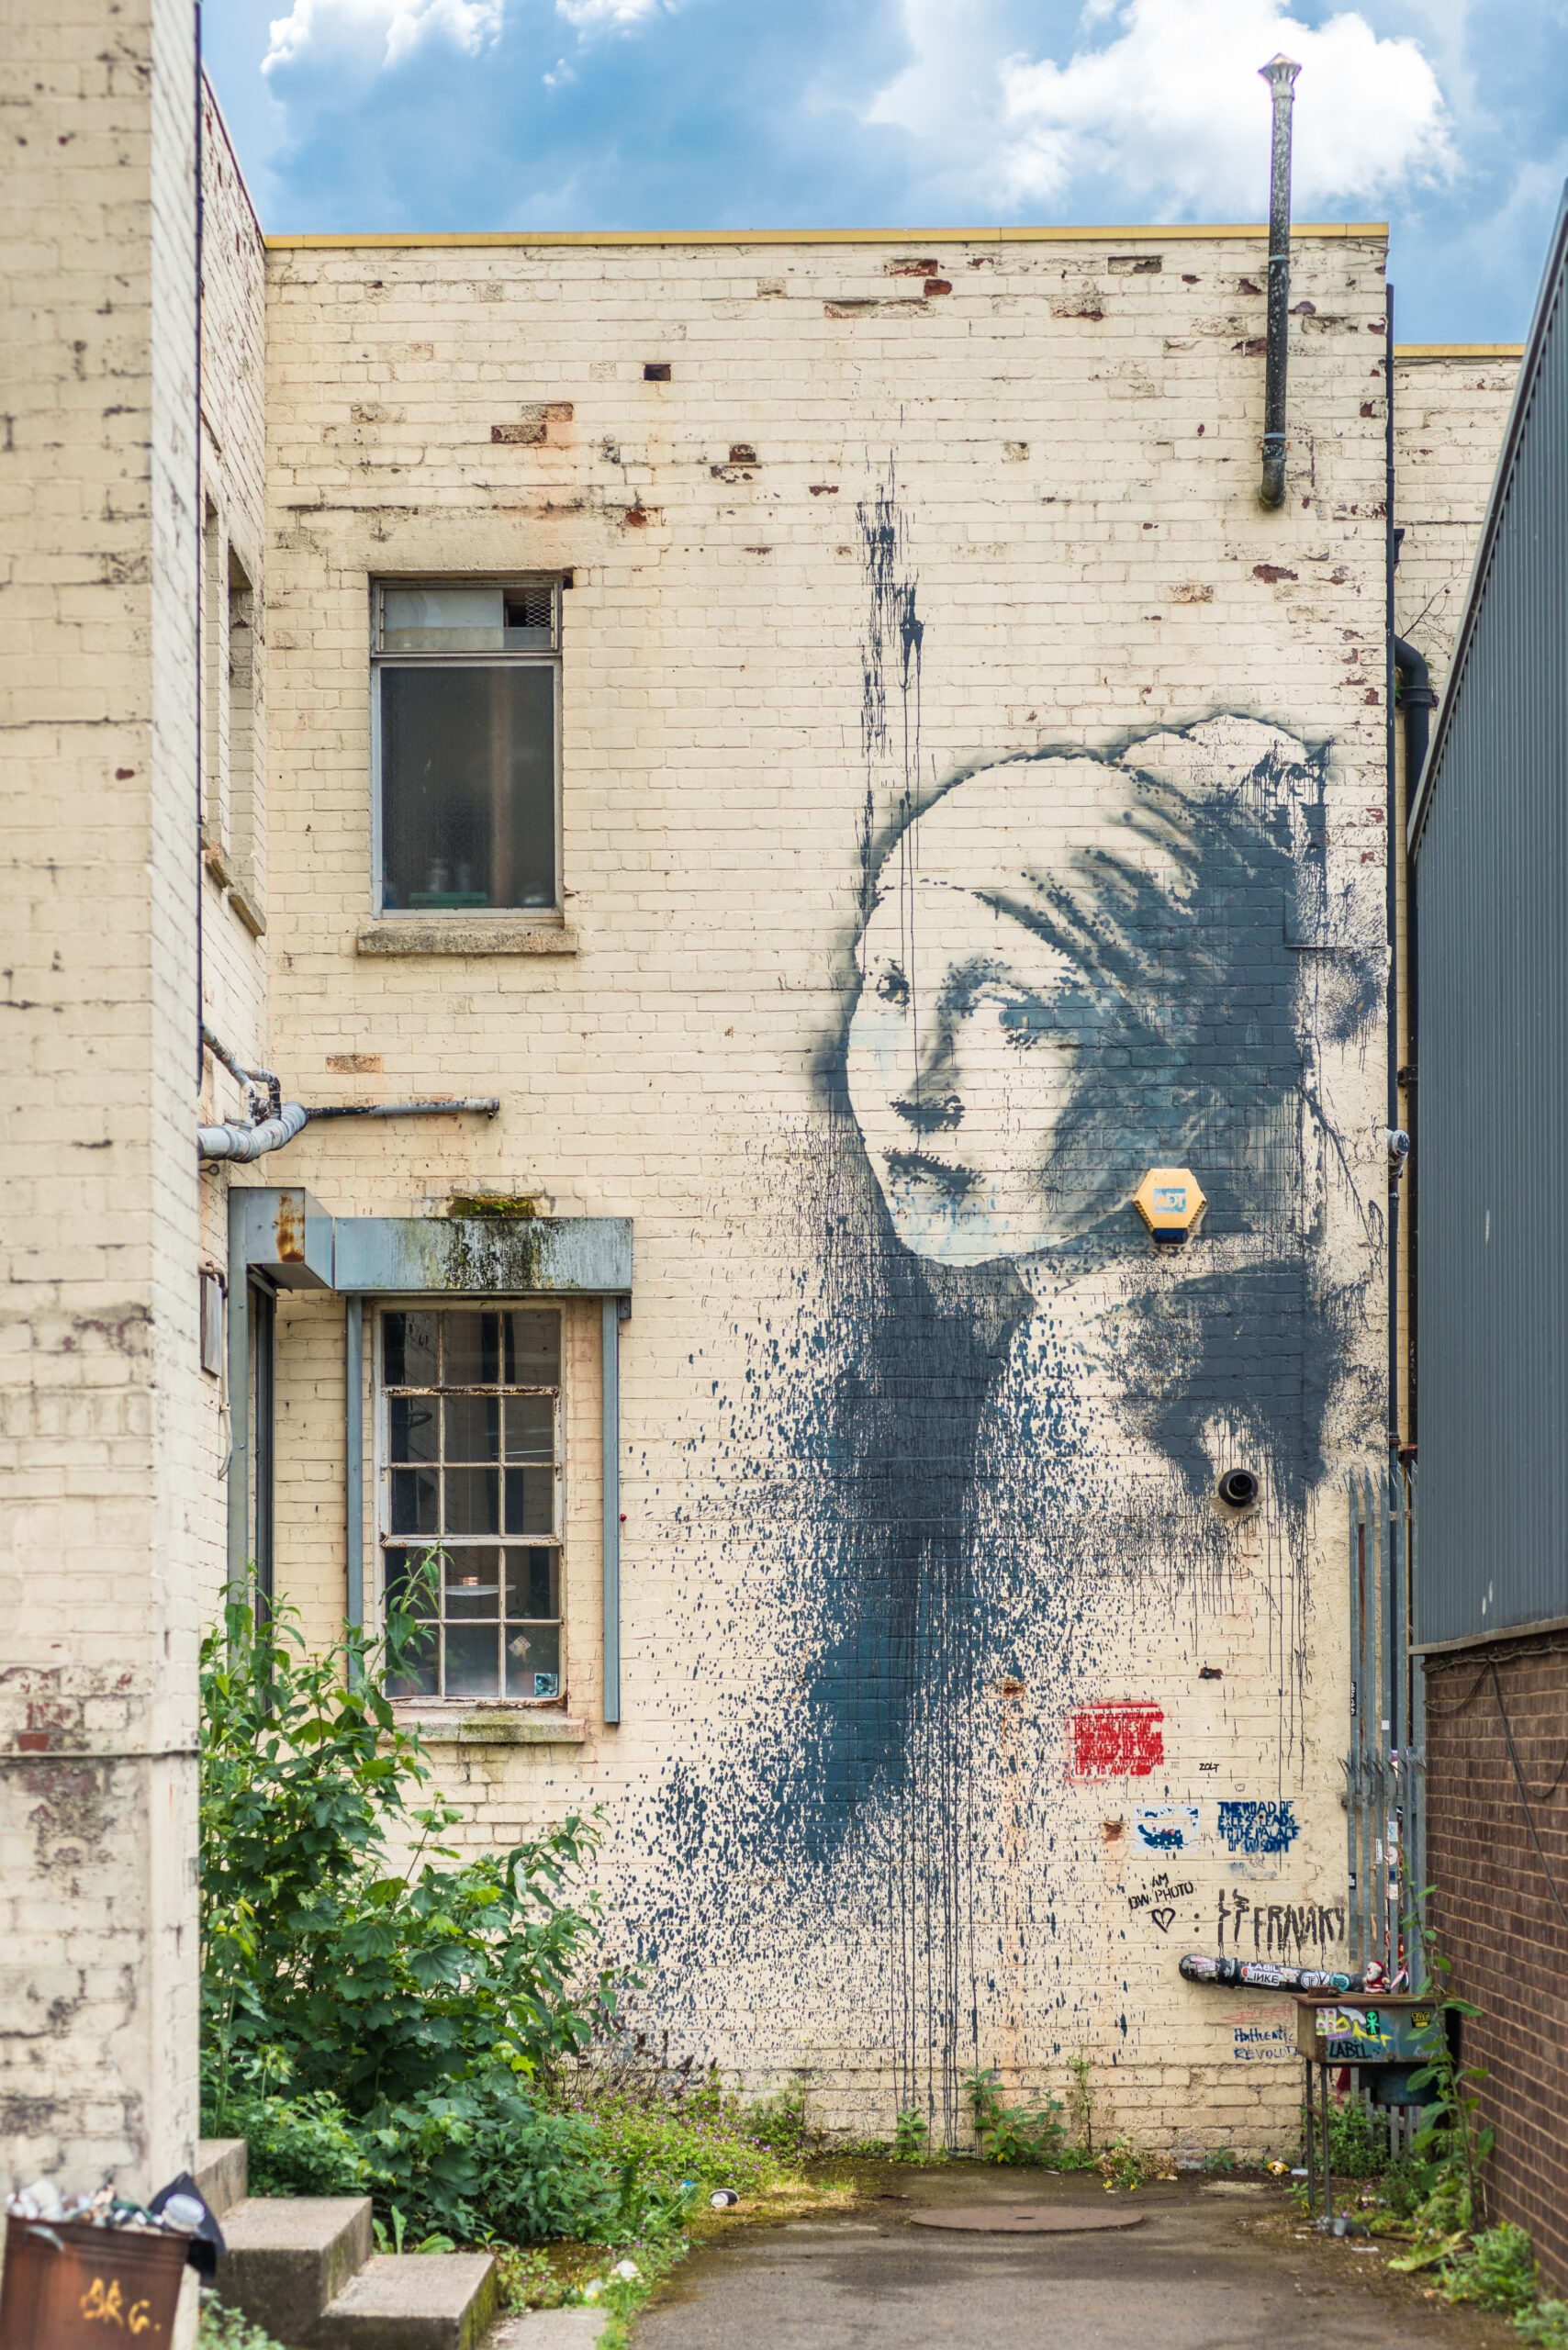 Girl with a Pierced Eardrum, by Banksy on the wall of an alley in Albion Docks, Bristol